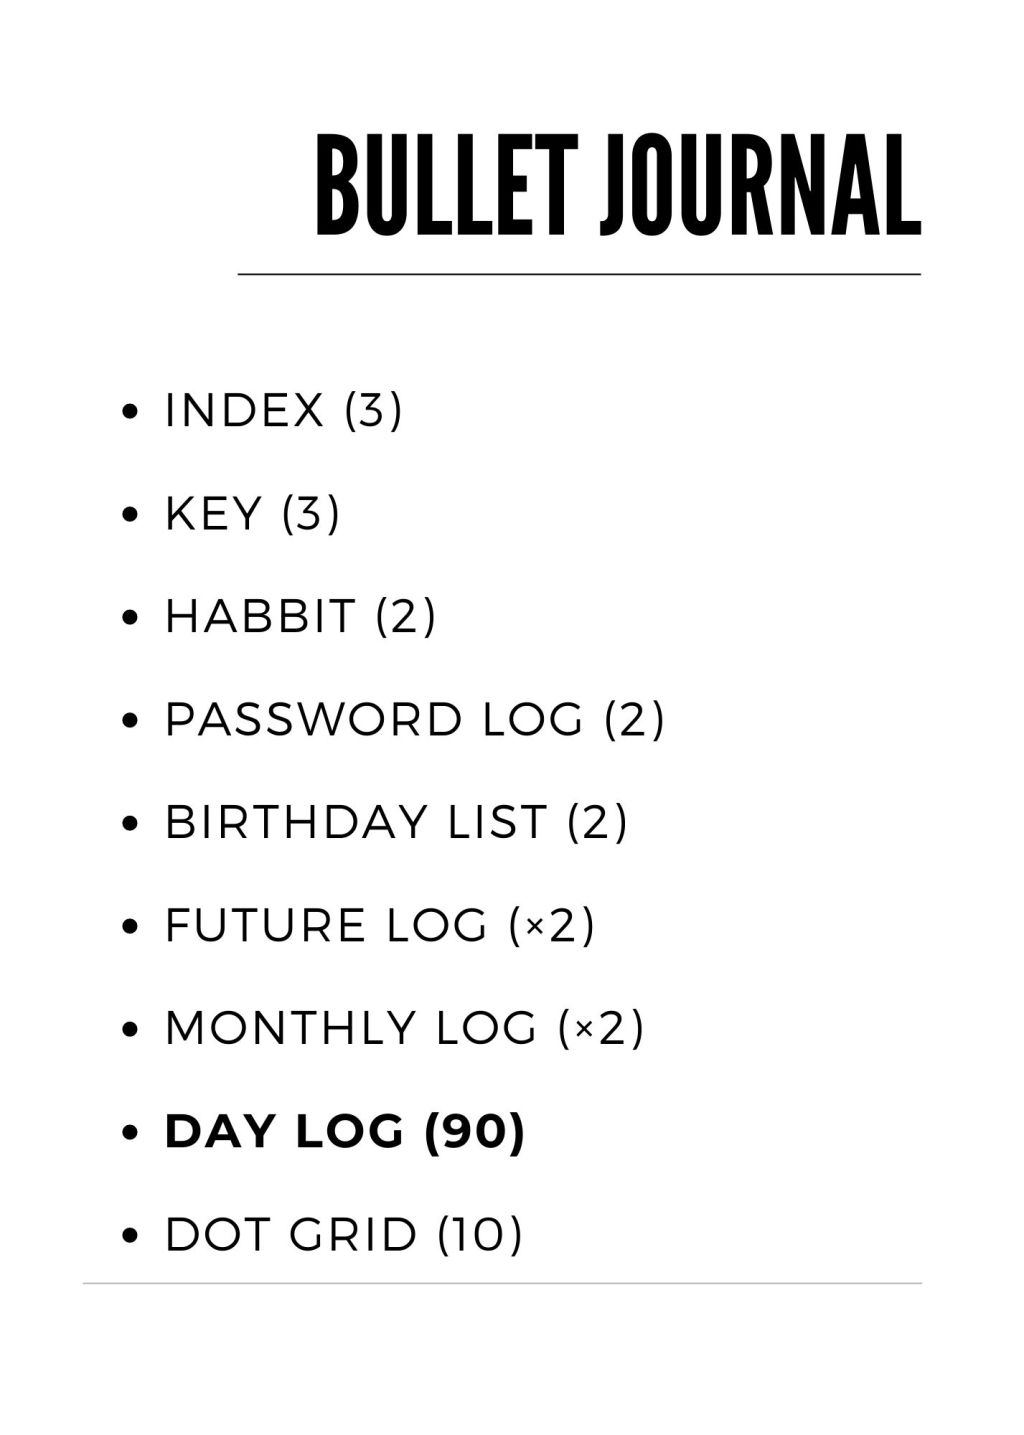 detailed contents of  my bullet journal